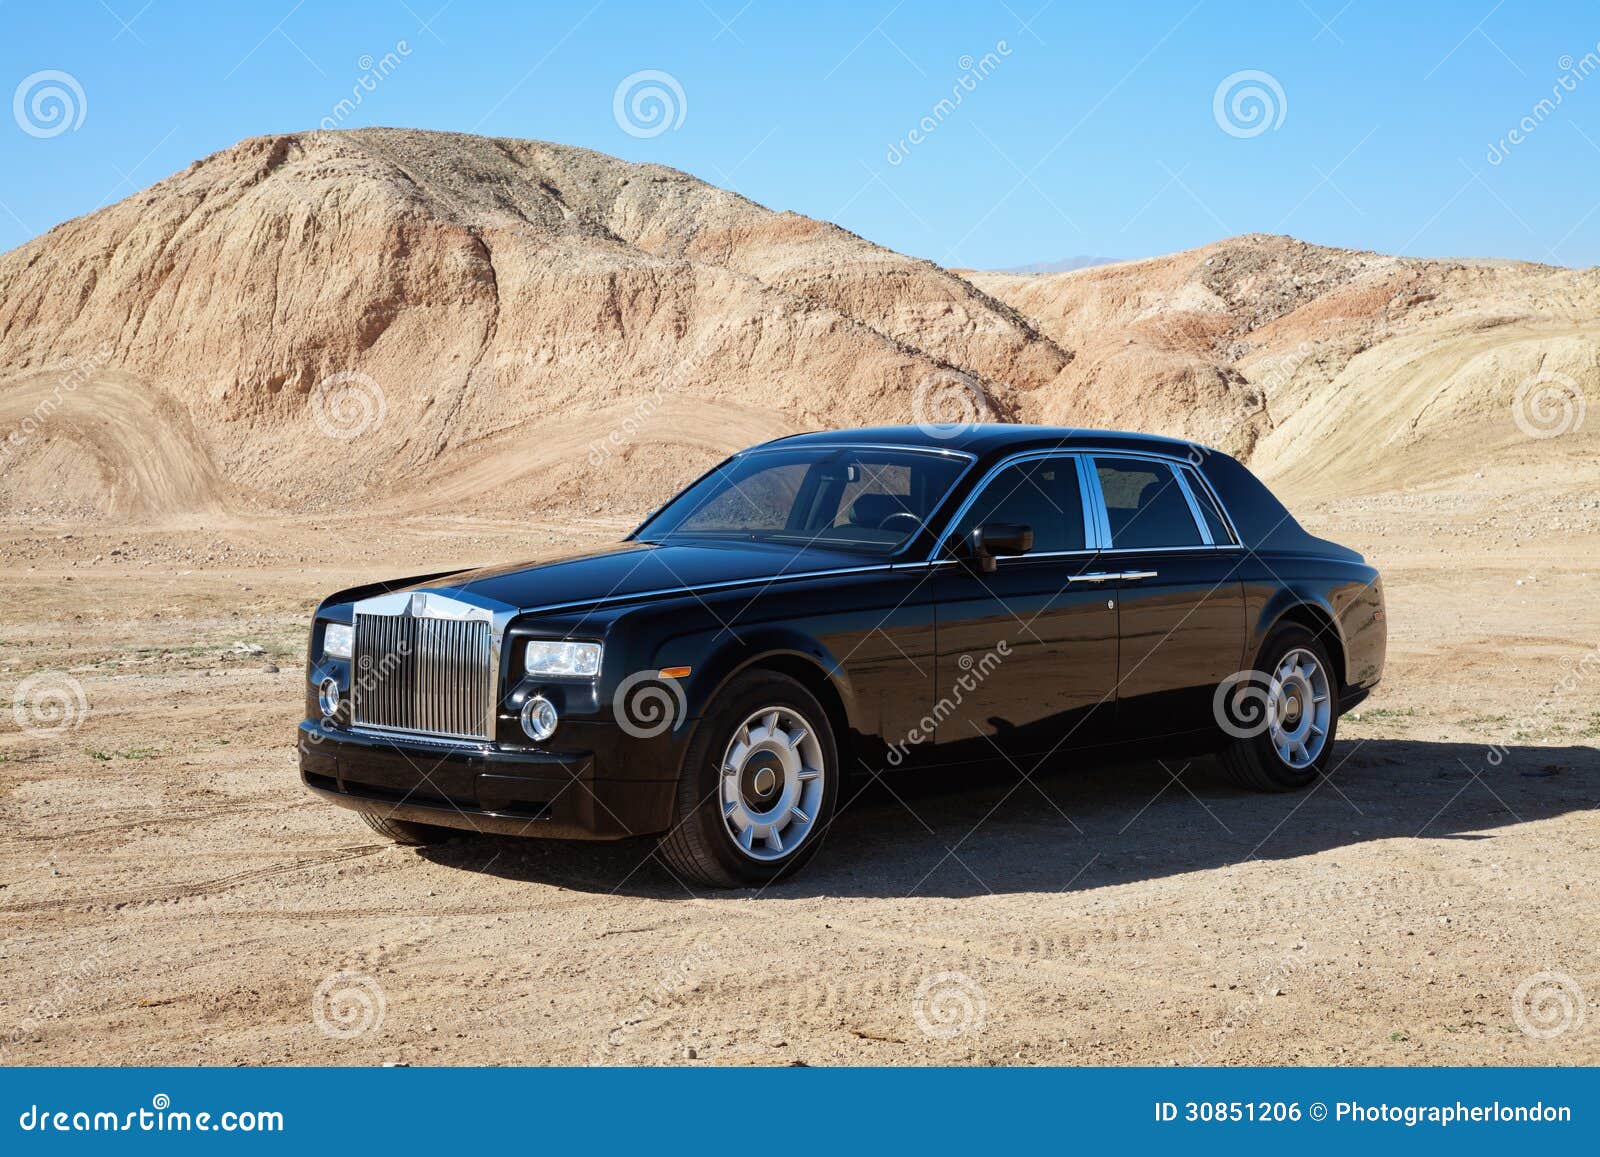 rolls royce car parked on unpaved road in front of mountains